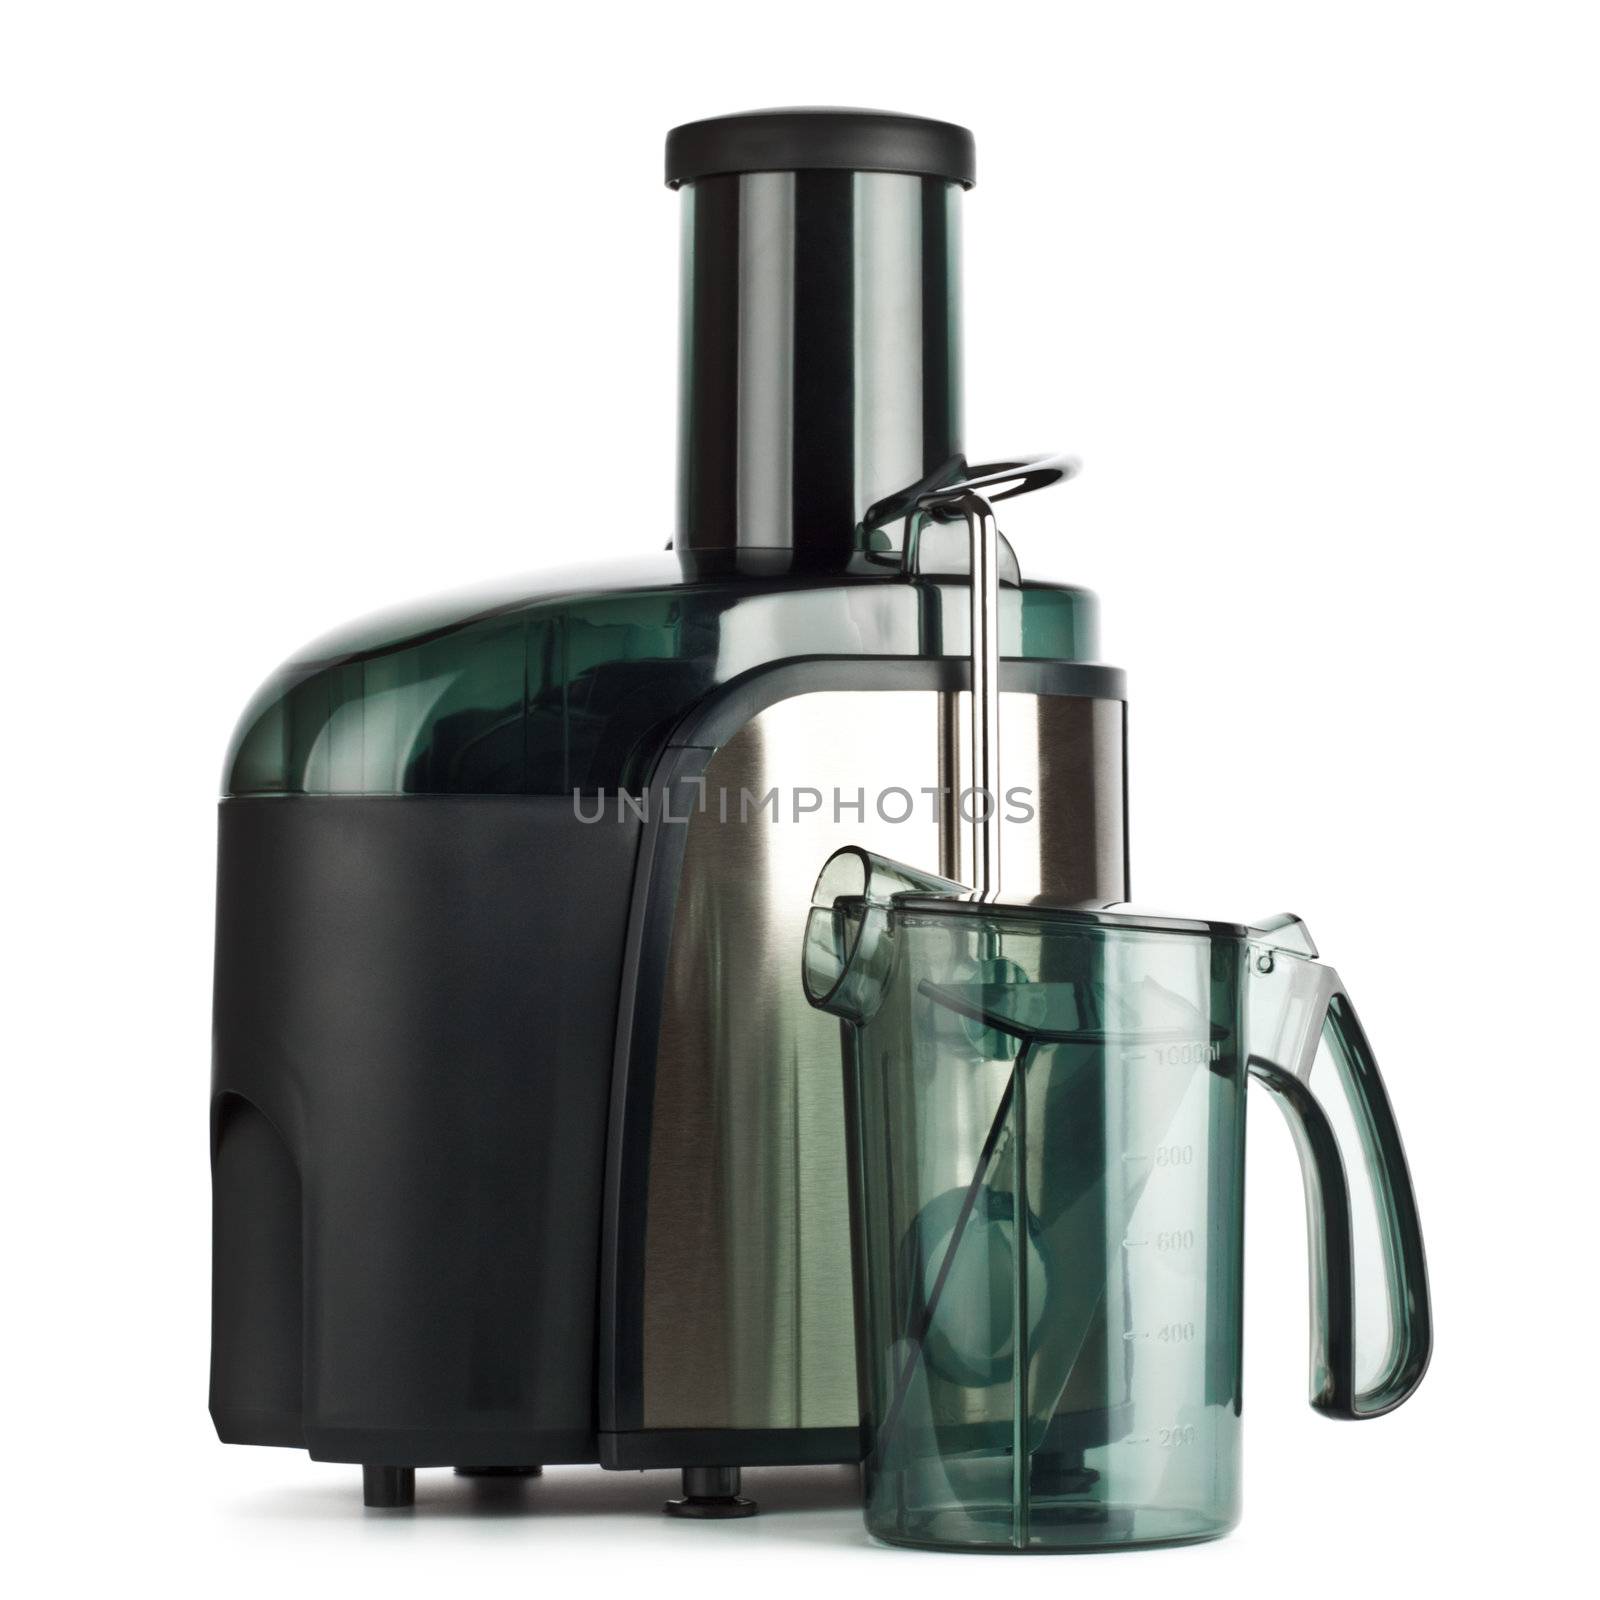 Juice Extractor by petr_malyshev